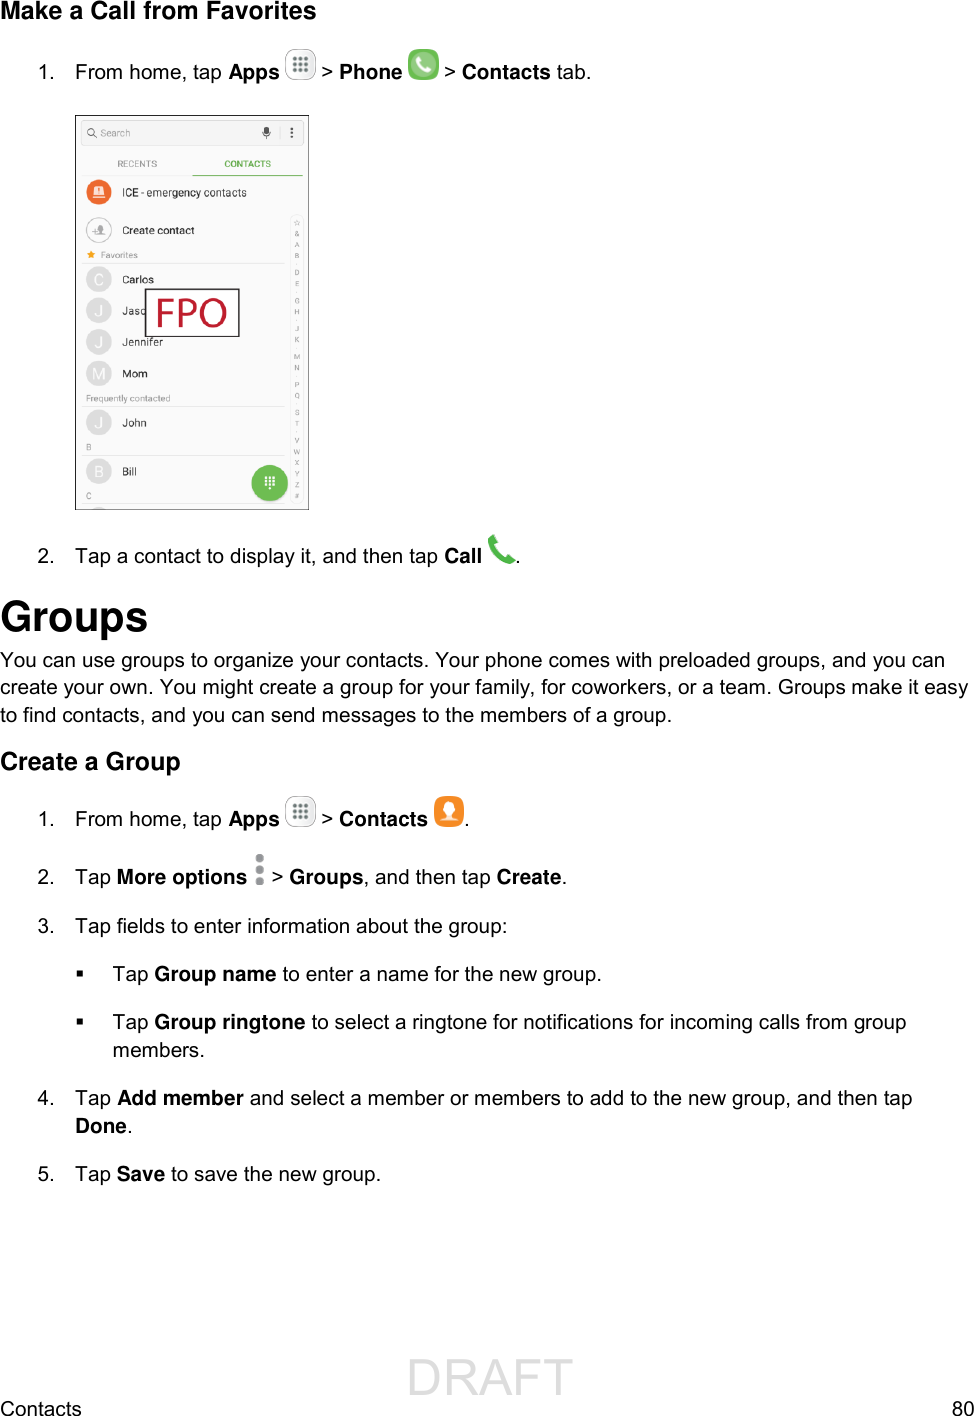                  DRAFT FOR INTERNAL USE ONLYContacts  80 Make a Call from Favorites 1.  From home, tap Apps   &gt; Phone   &gt; Contacts tab.   2.  Tap a contact to display it, and then tap Call  . Groups You can use groups to organize your contacts. Your phone comes with preloaded groups, and you can create your own. You might create a group for your family, for coworkers, or a team. Groups make it easy to find contacts, and you can send messages to the members of a group. Create a Group 1.  From home, tap Apps   &gt; Contacts  . 2.  Tap More options   &gt; Groups, and then tap Create. 3.  Tap fields to enter information about the group:   Tap Group name to enter a name for the new group.   Tap Group ringtone to select a ringtone for notifications for incoming calls from group members. 4.  Tap Add member and select a member or members to add to the new group, and then tap Done. 5.  Tap Save to save the new group. 